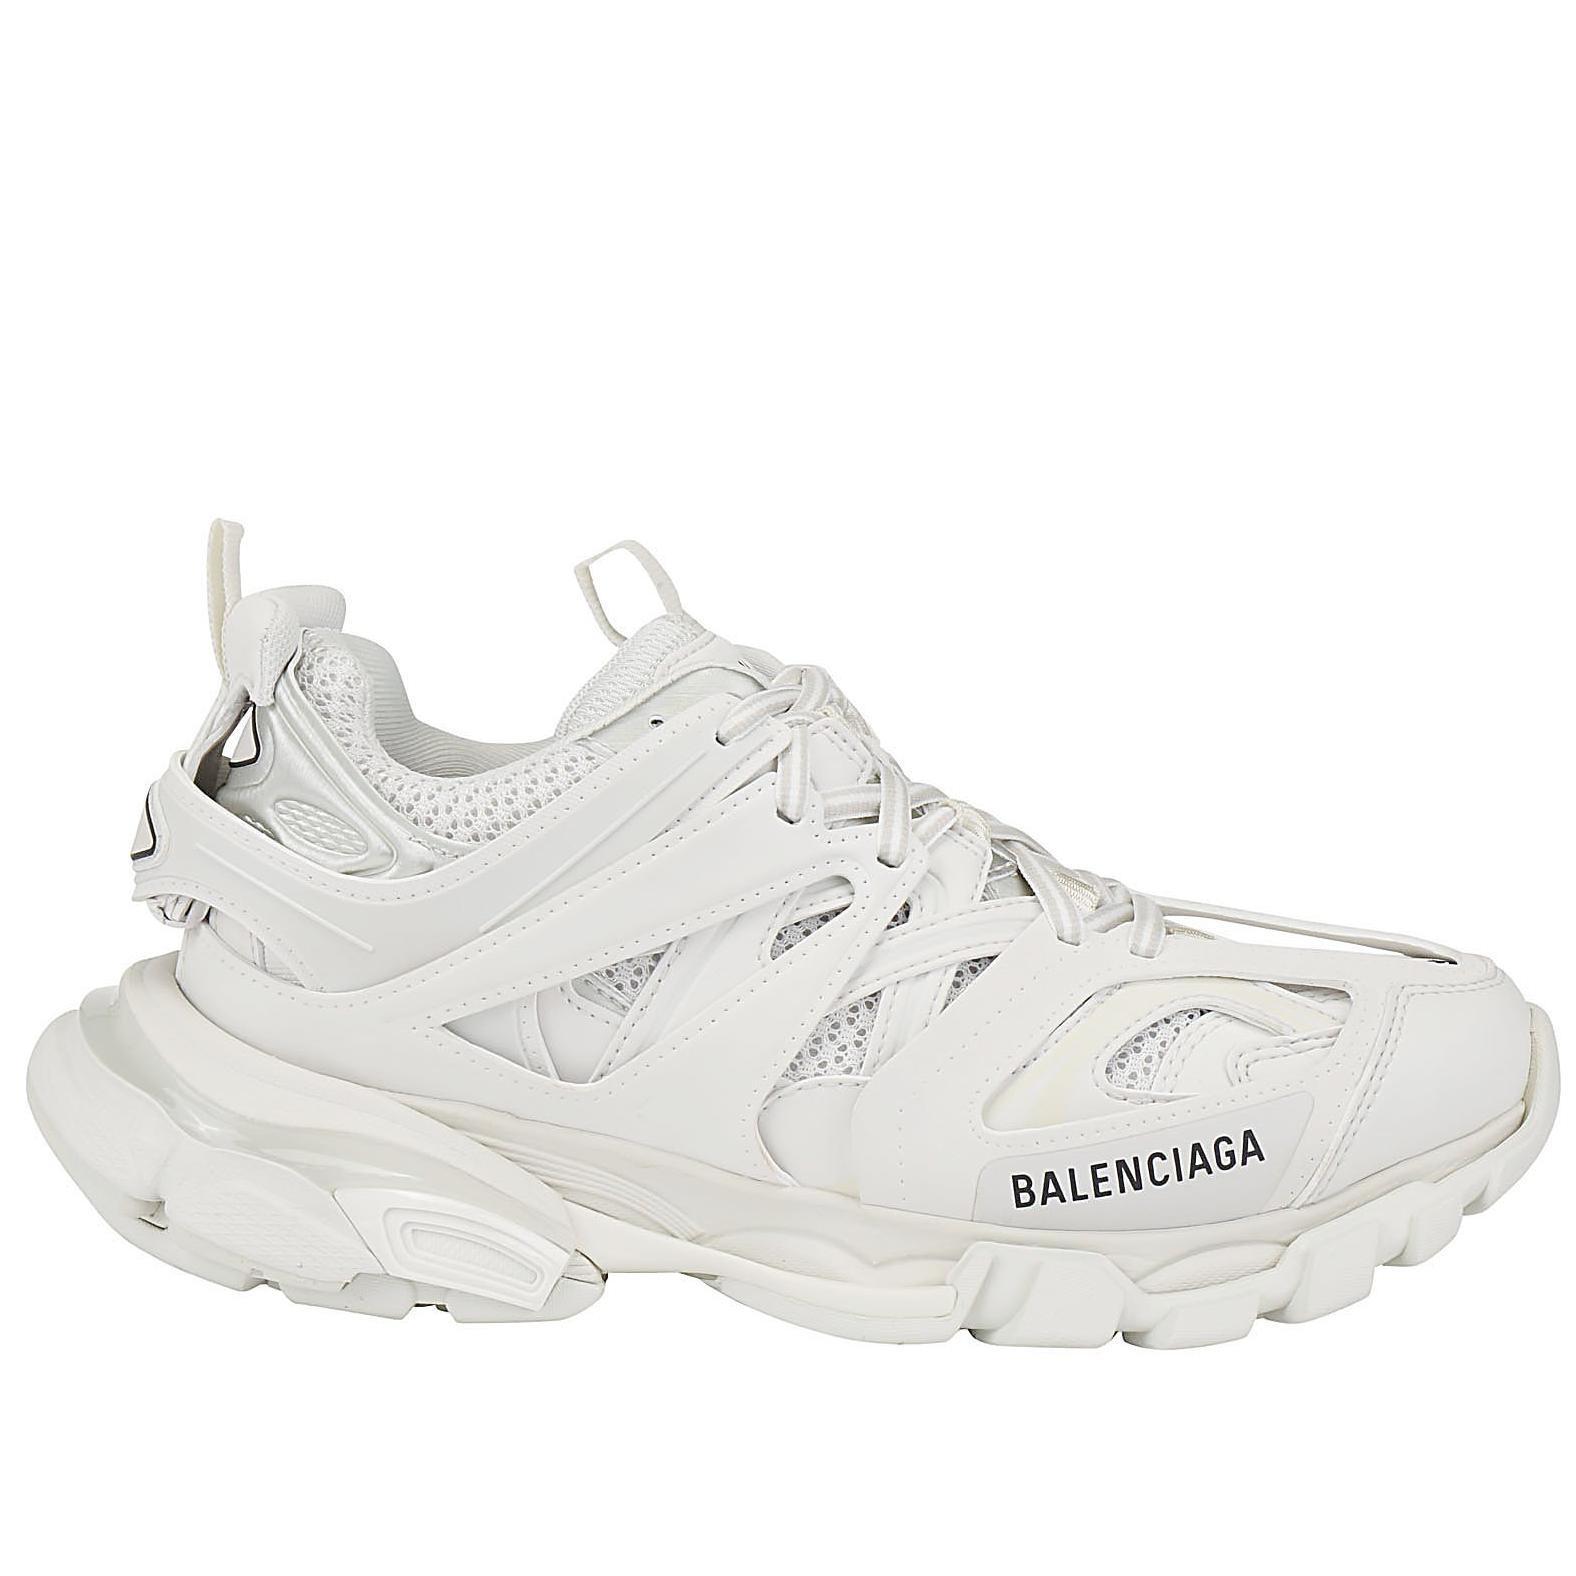 Balenciaga Synthetic Track Trainers in White - Save 41% - Lyst